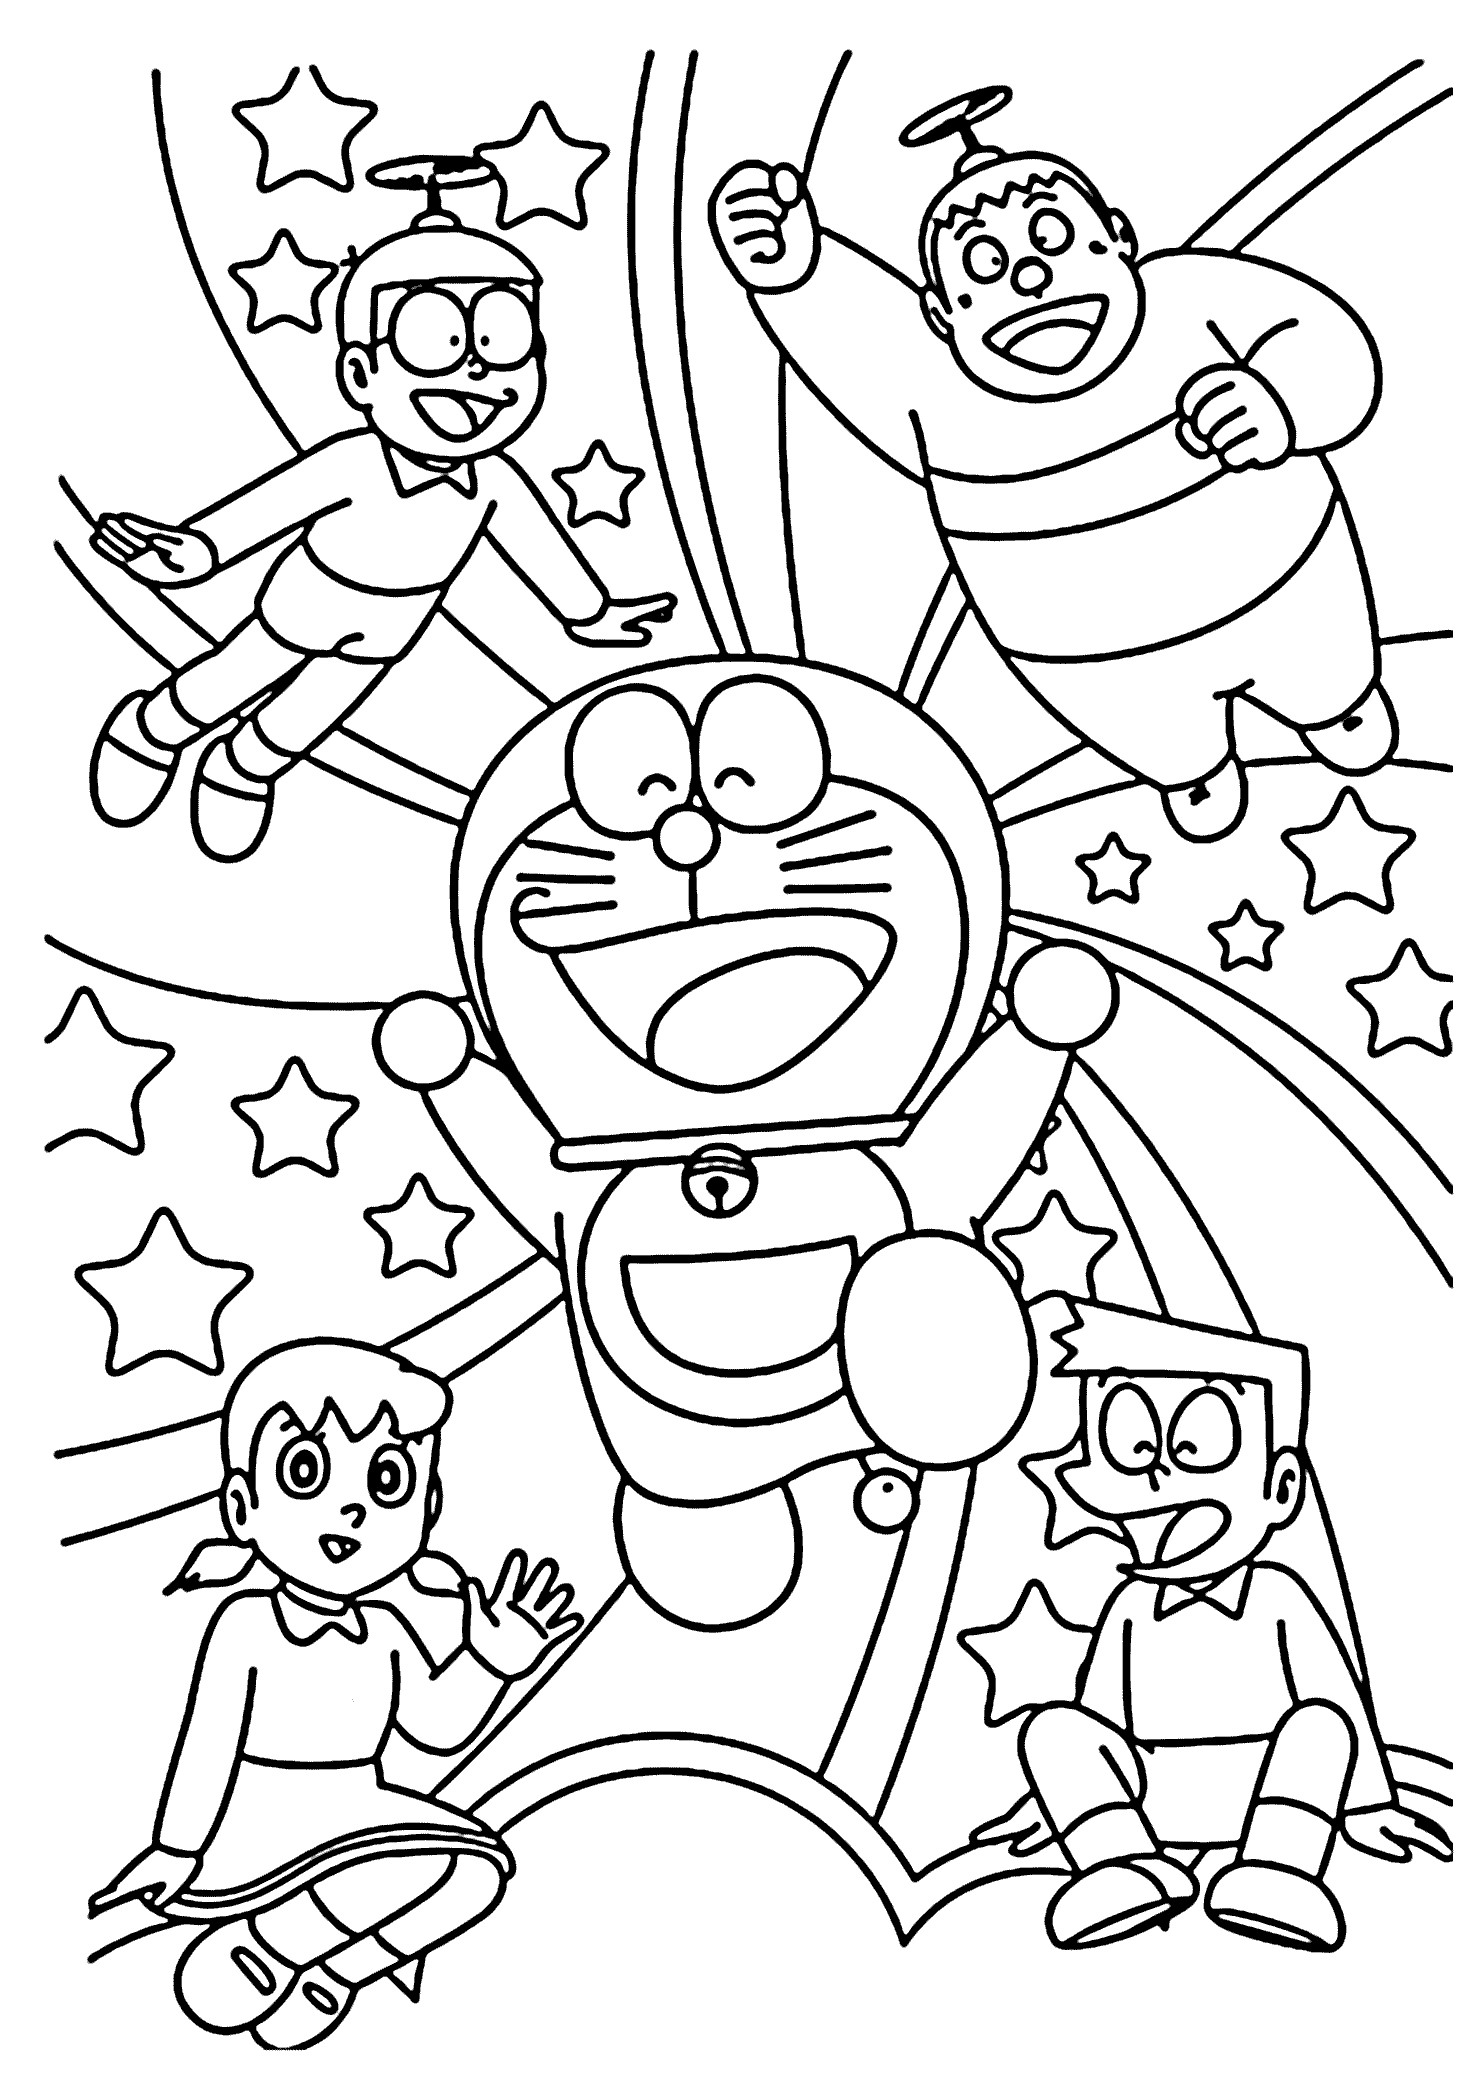 Coloring Sheets Free
 Doraemon Coloring Pages to and print for free